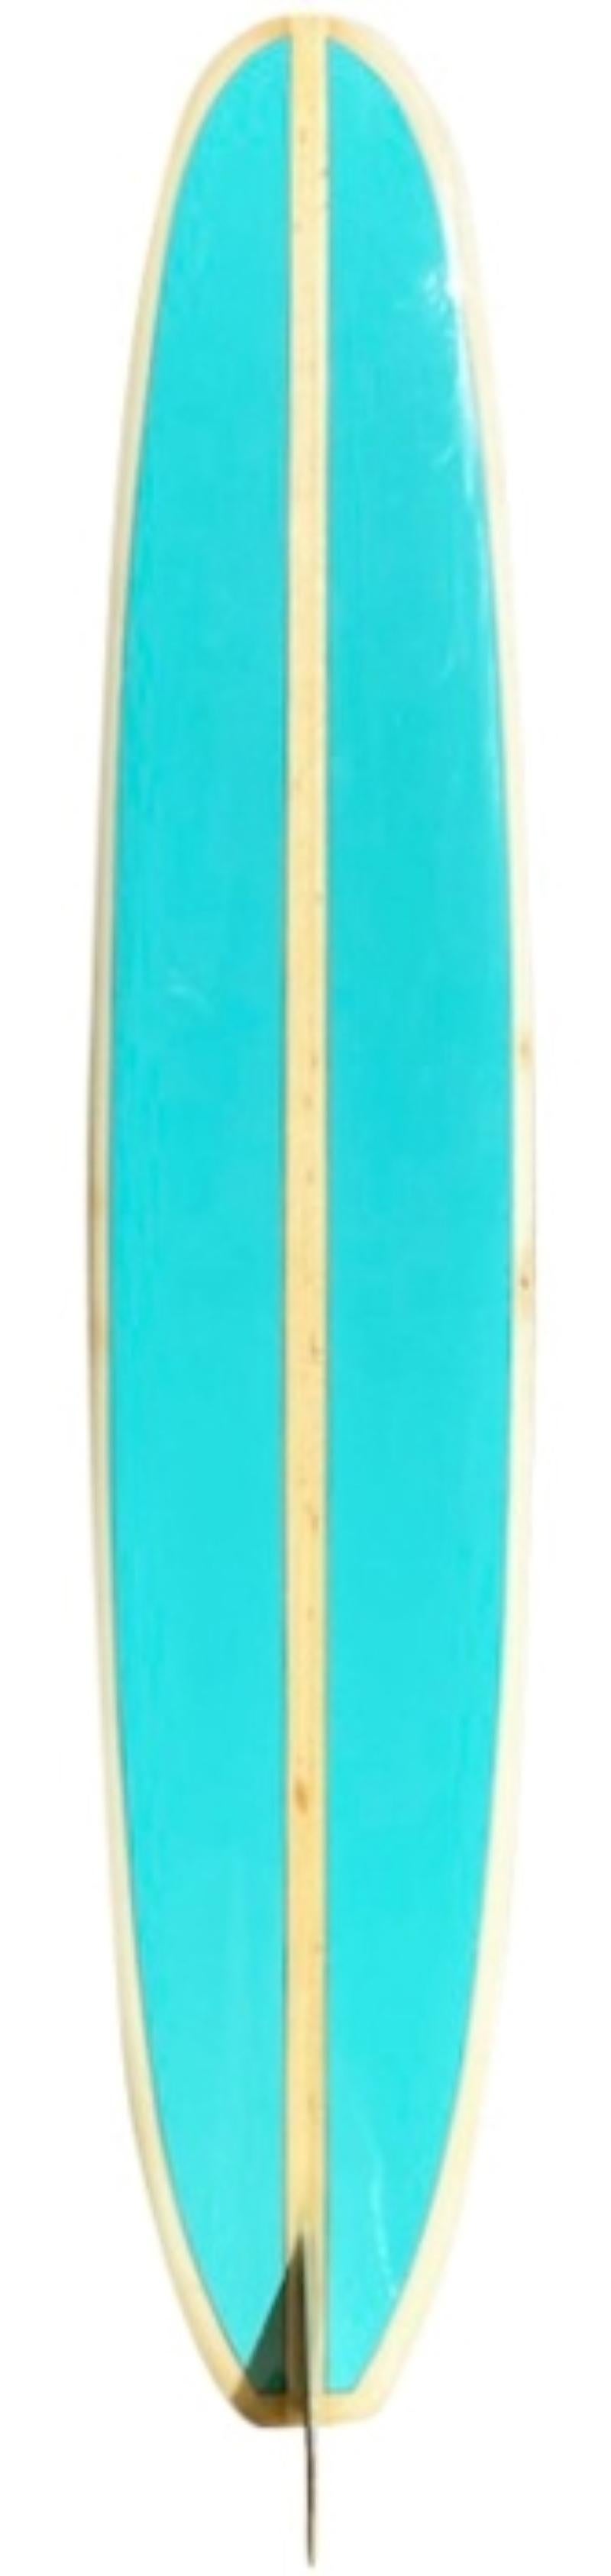 Hobie surfboards longboard shaped in the early 1960’s, serial #7496. Features beautiful bright turquoise panels with a redwood single fin. A fantastic example of an early 1960s shaped Hobie longboard. Would make an amazing display piece or